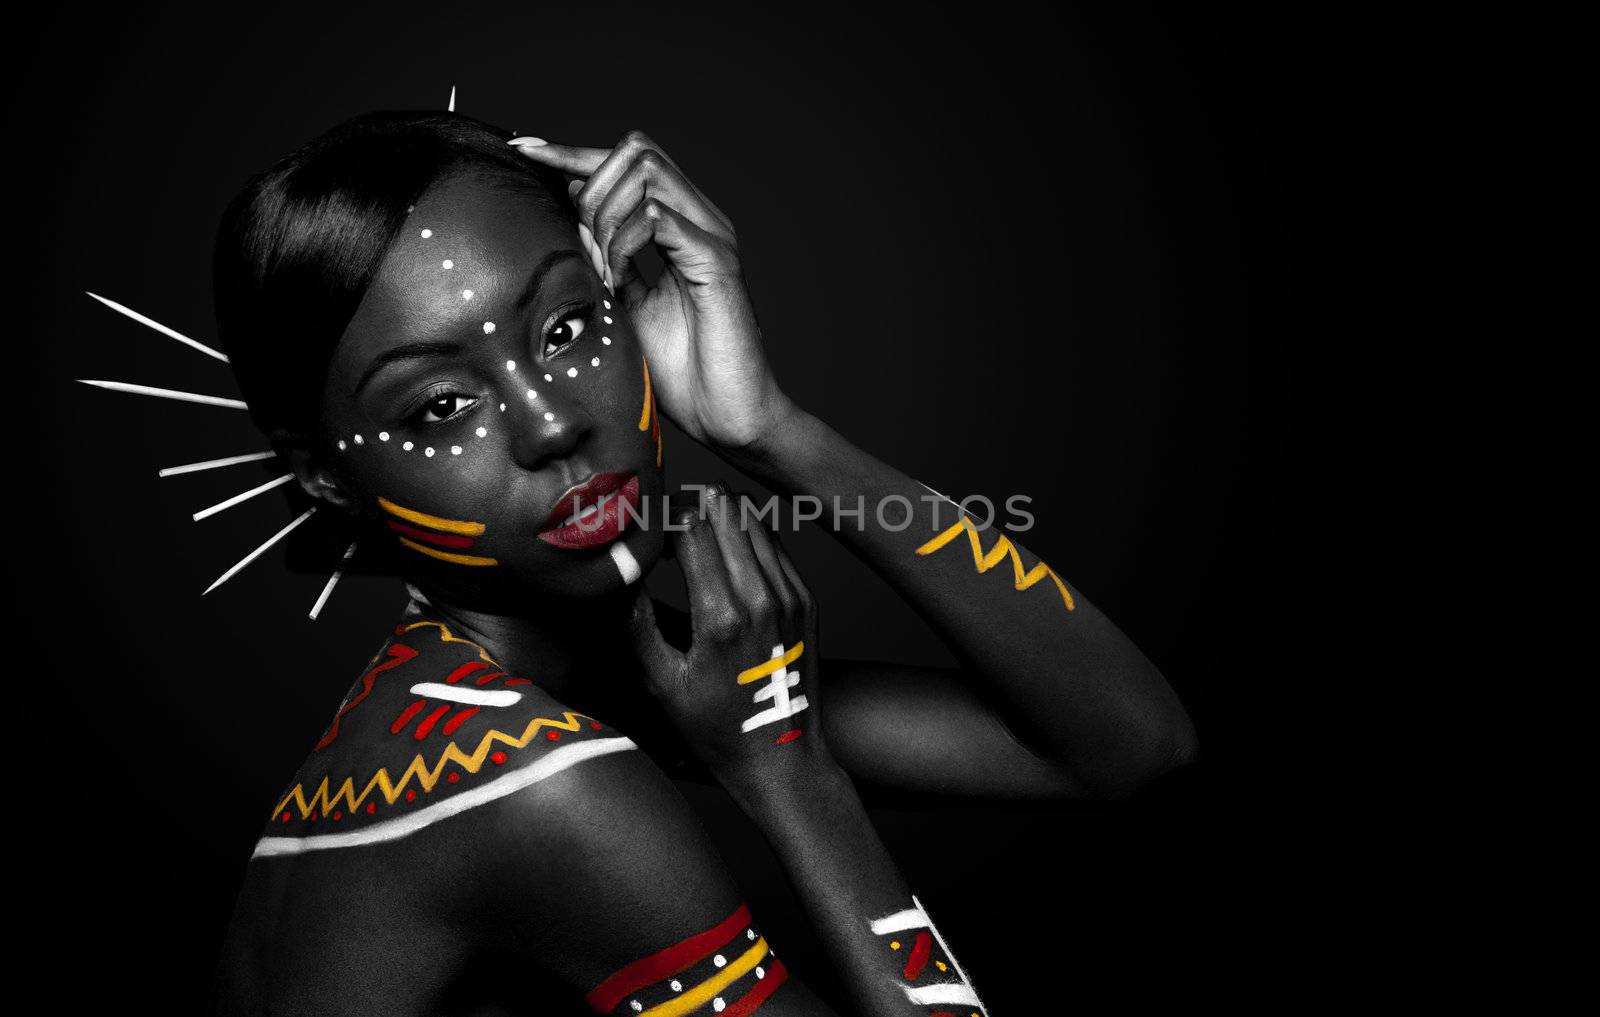 Tribal beauty woman with makeup by phakimata